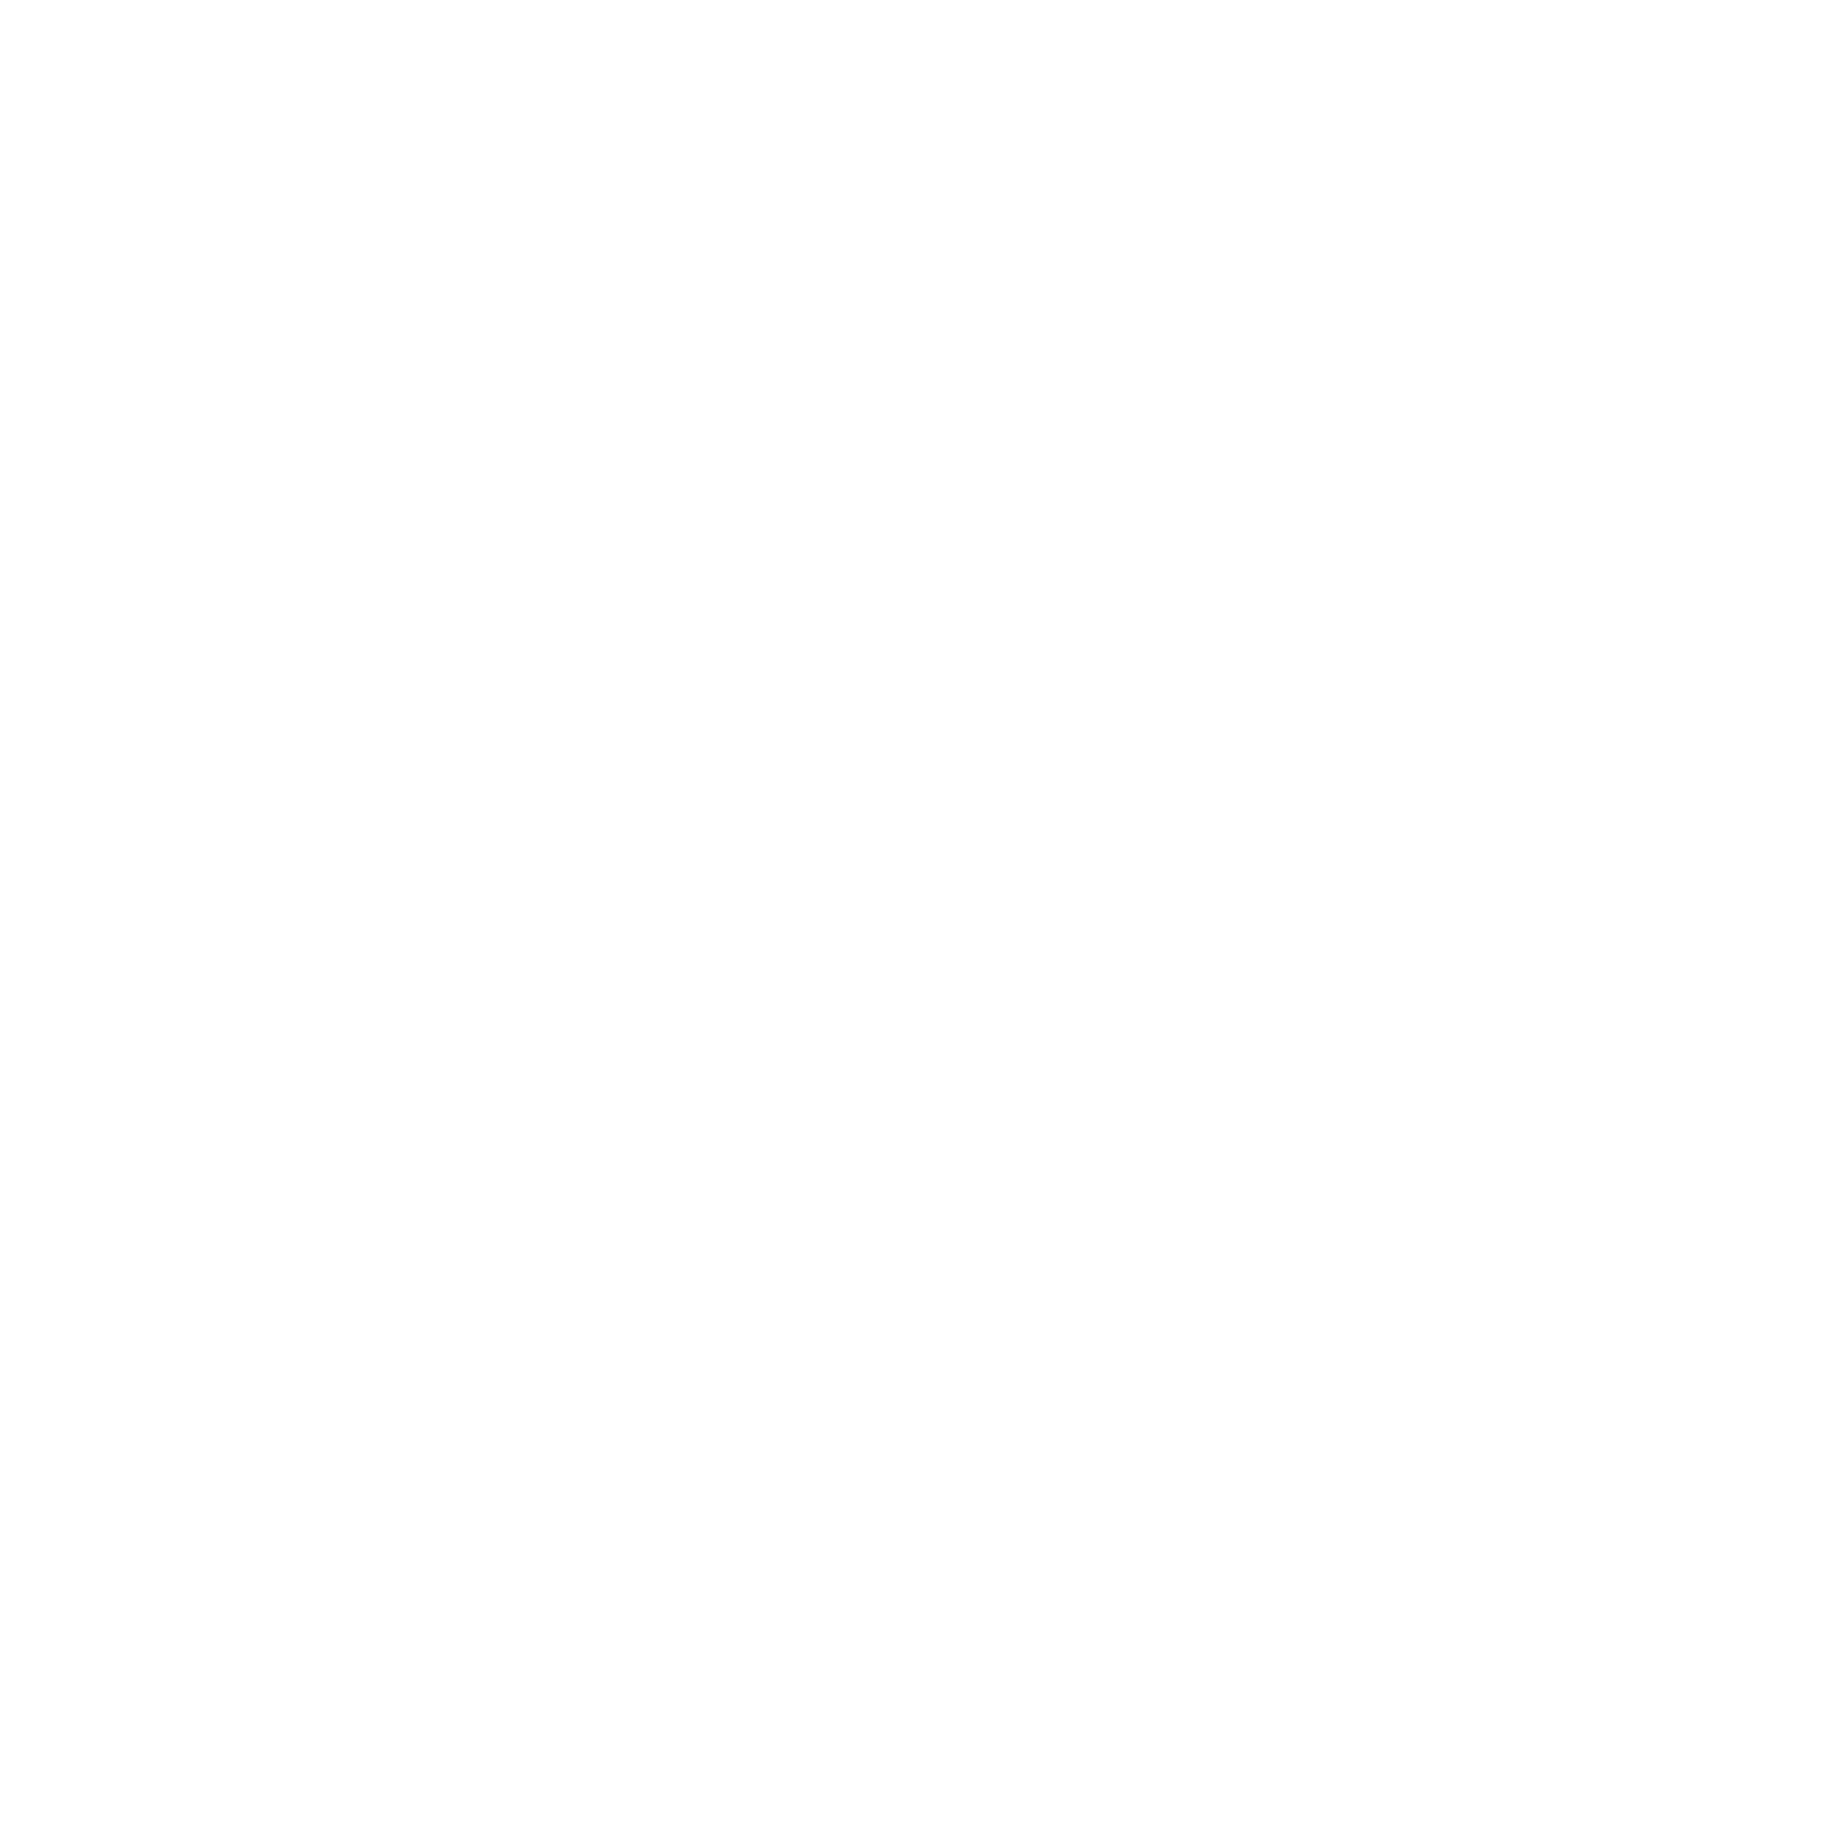 The butterfly mark logo. The Butterfly Mark is an independent accreditation mark that identifies the luxury brands that meet the highest standards of verified innovation and environmental performance.